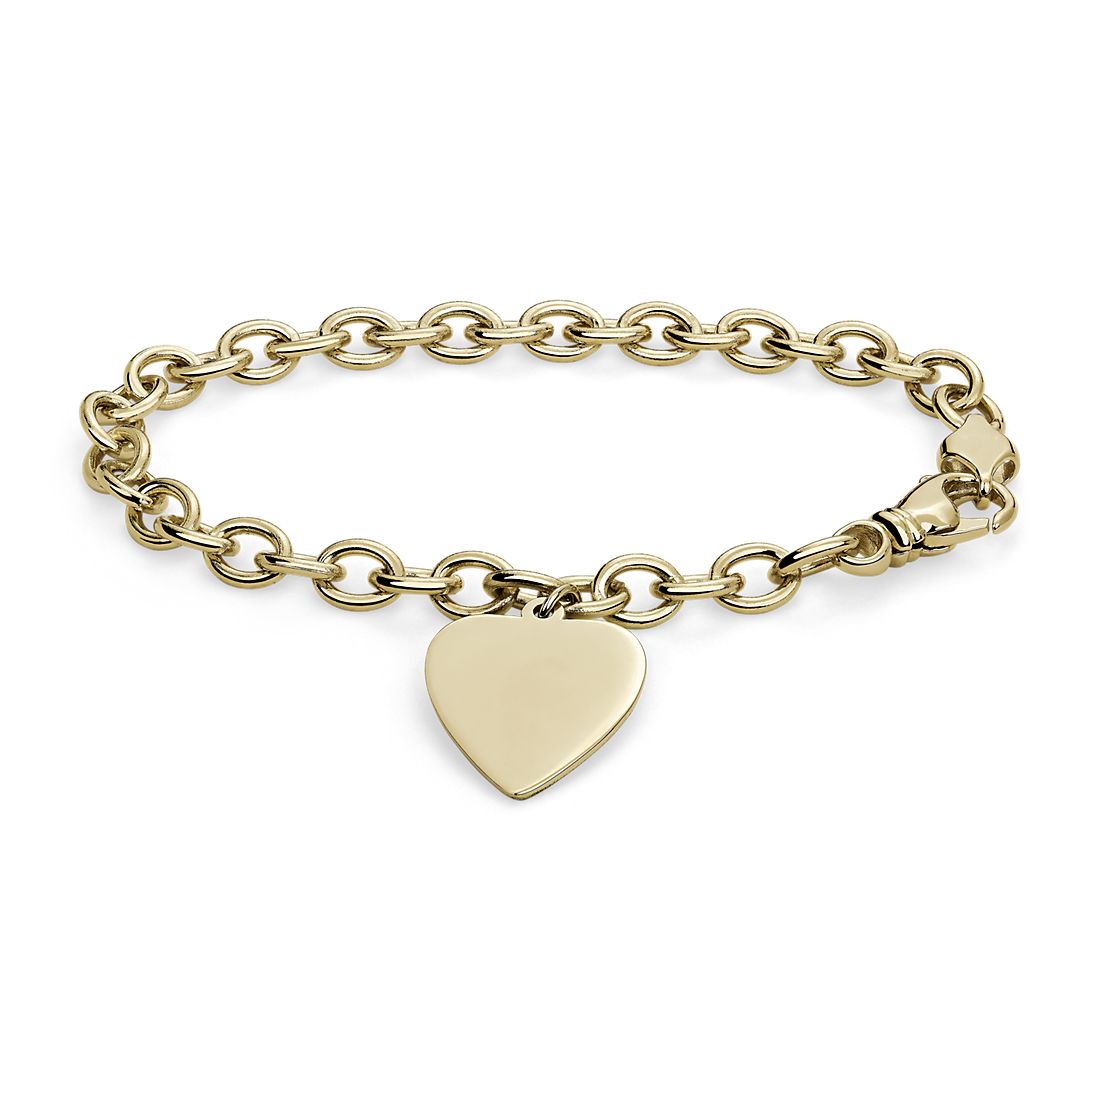 7.5" Heart Tag Bracelet in 14k Yellow Gold (6 mm)